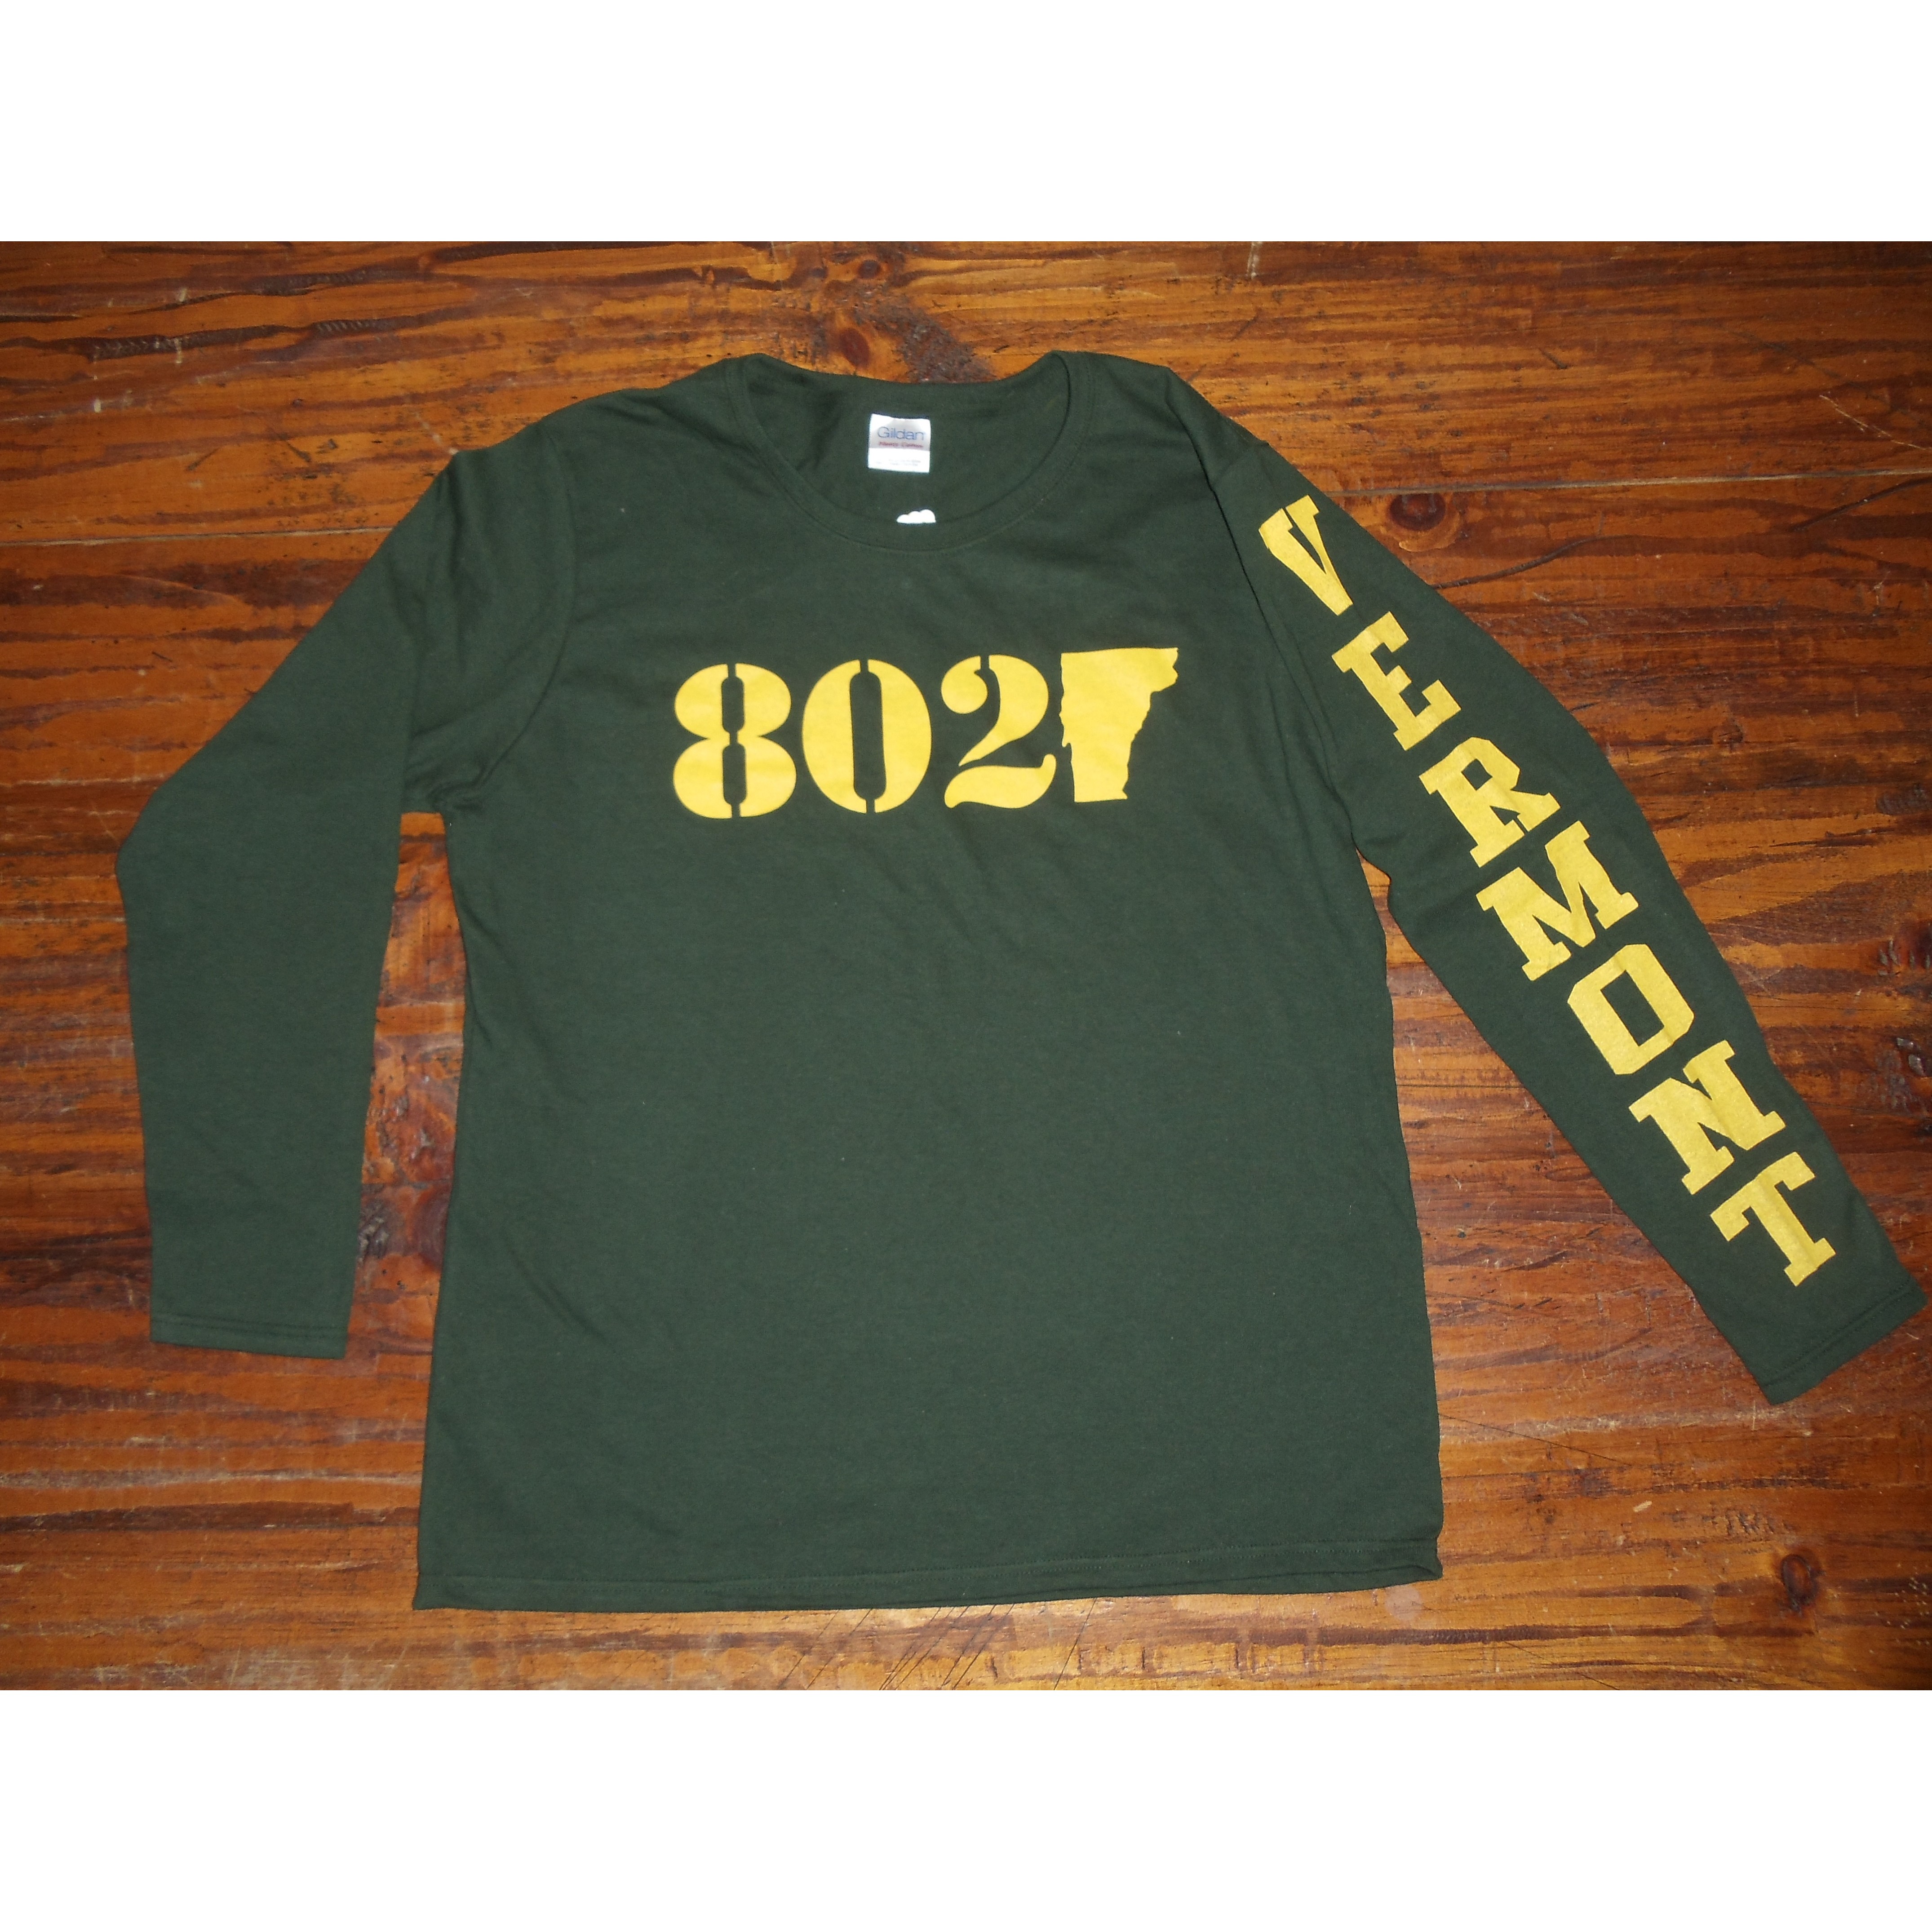 802 Classic VT Sleeve L/S (Ladies) (Forest/Yellow)